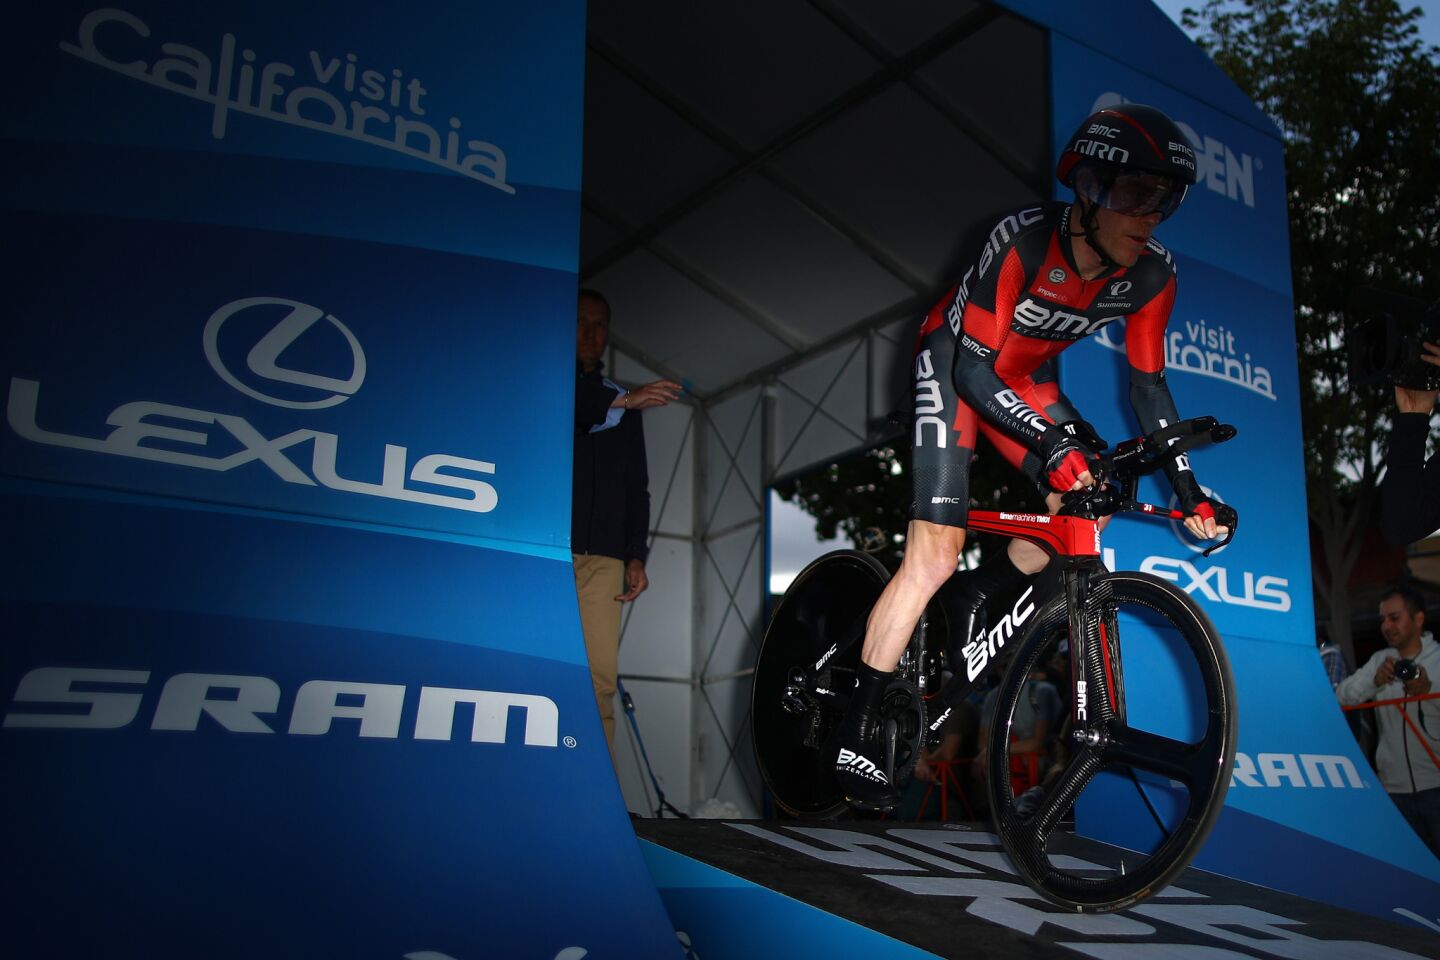 American Brent Bookwalter starts the individual time trial during the sixth stagte of the Amgen Tour of California on May 20 in Folsom.